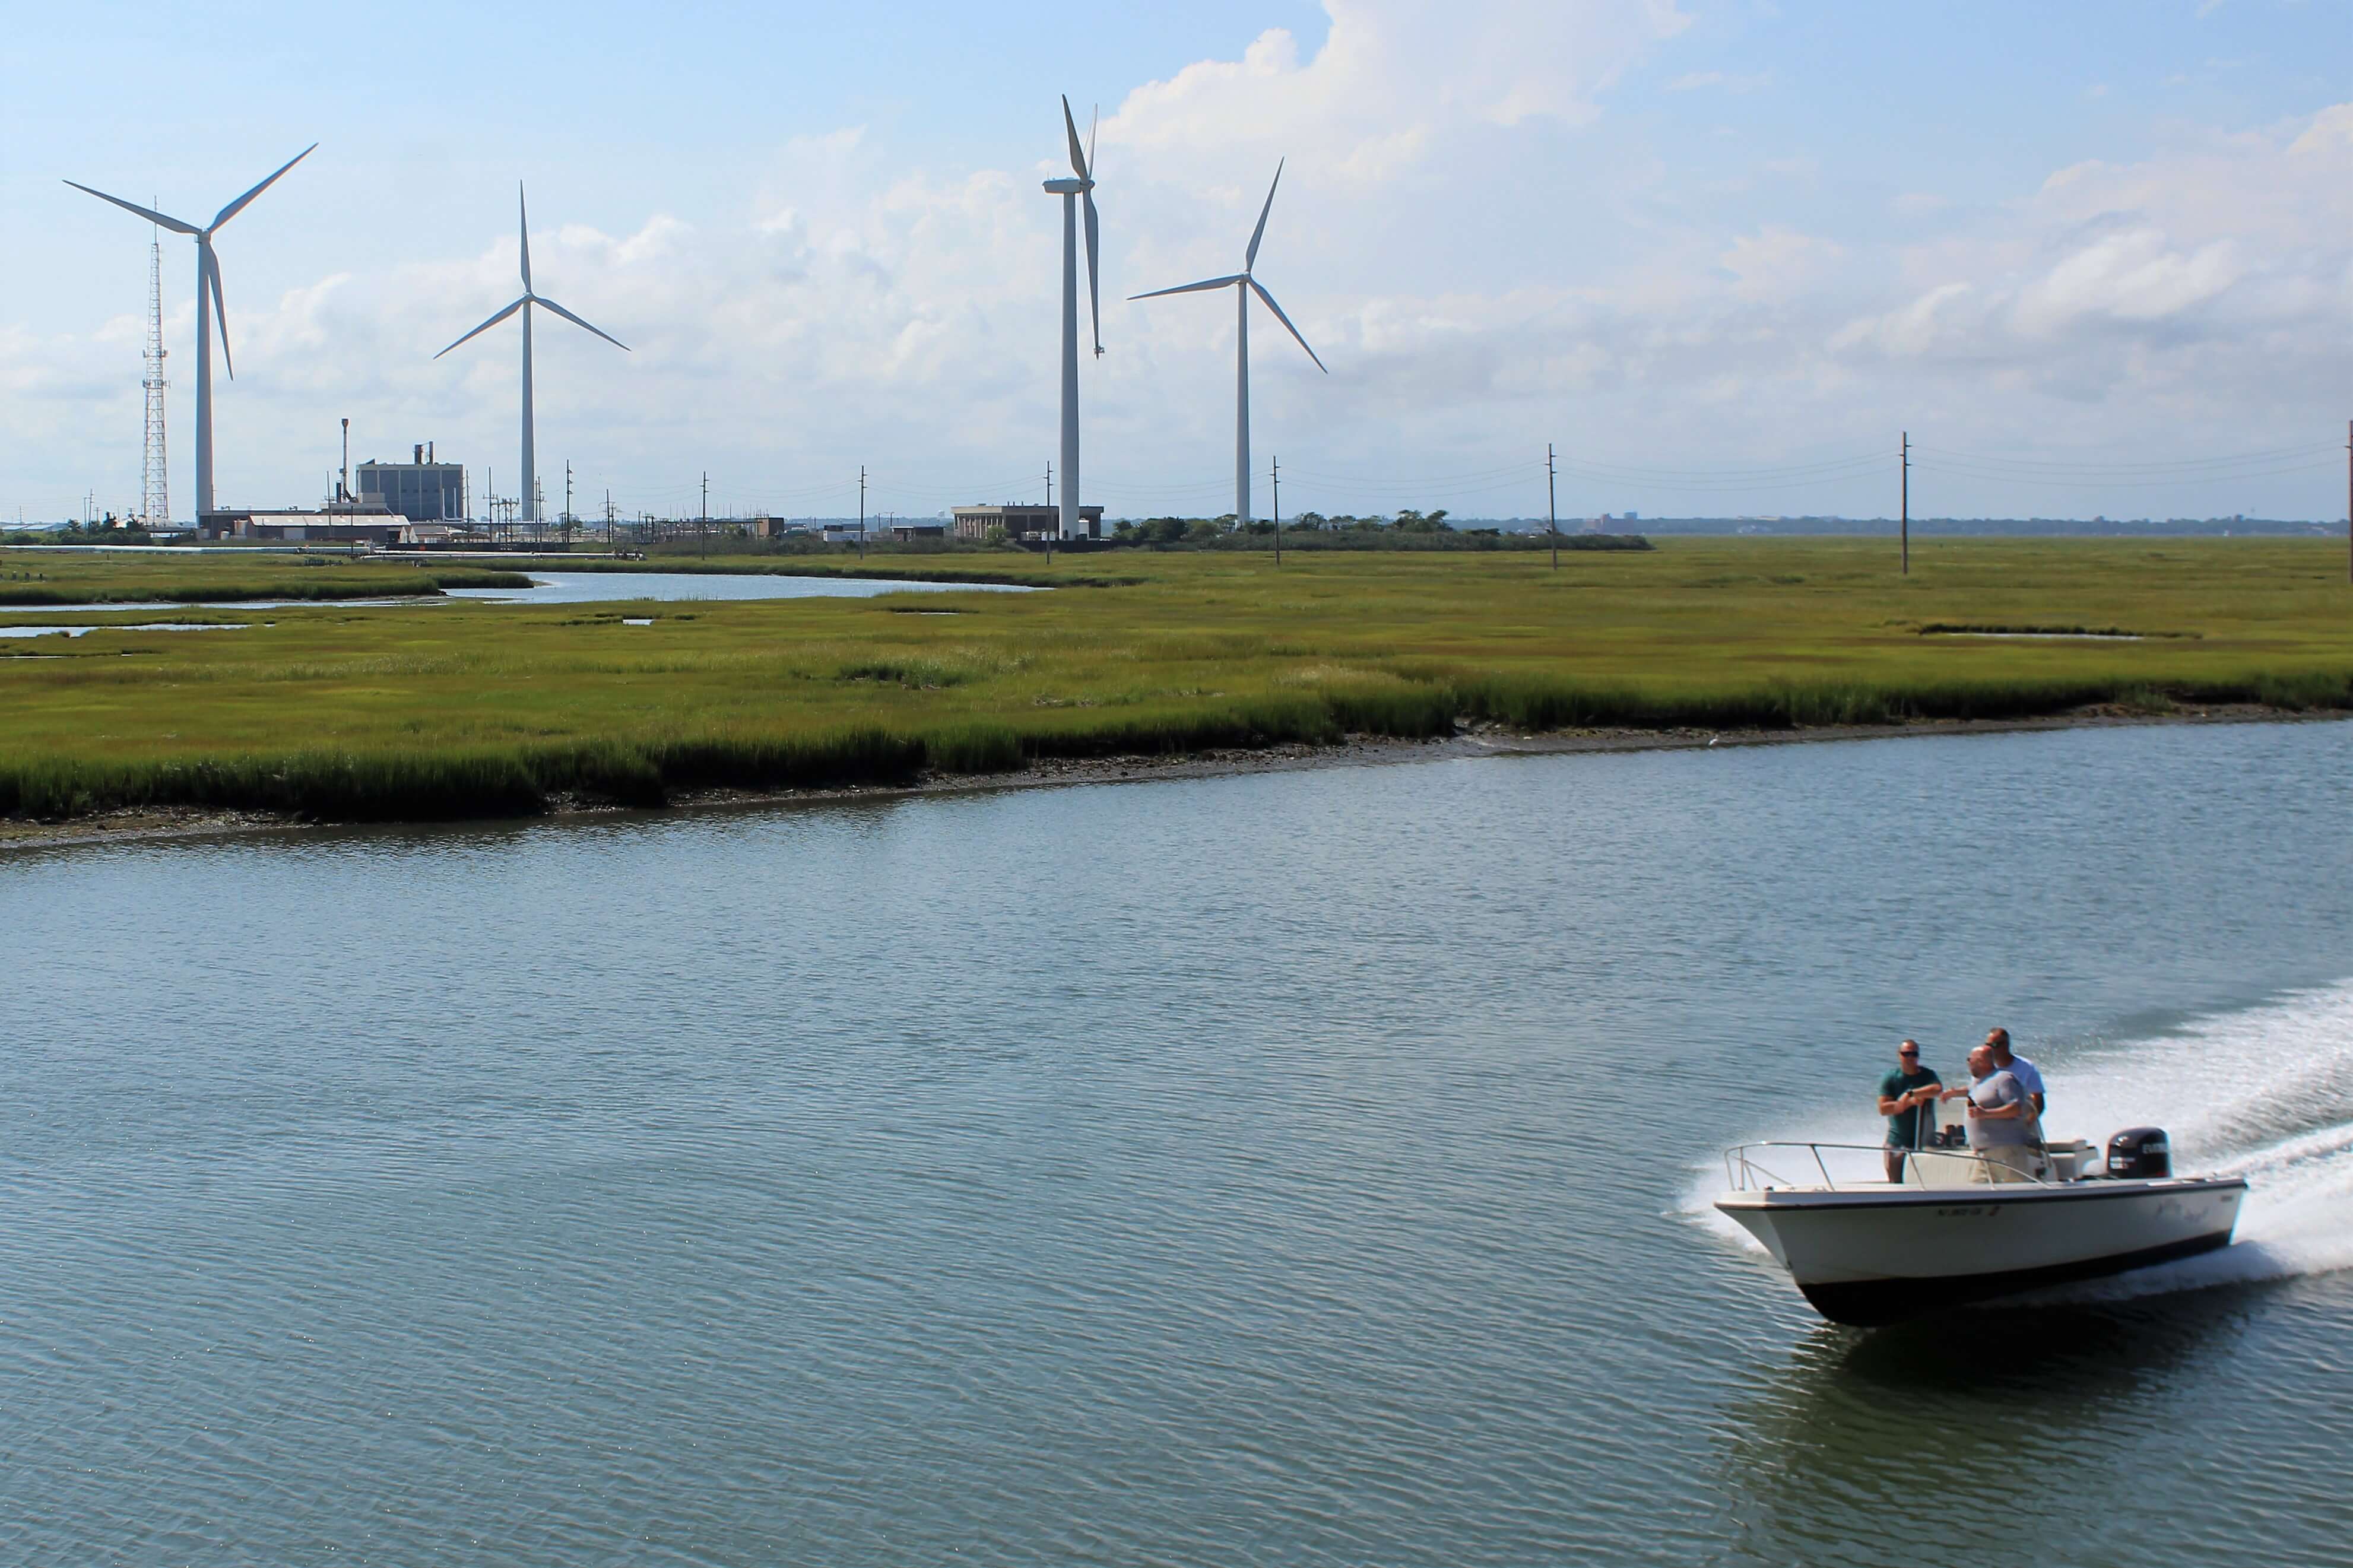 Wind turbines in Atlantic City were installed in 2005 as part of a clean-energy initiative undertaken by the Atlantic County Utilities Authority.  